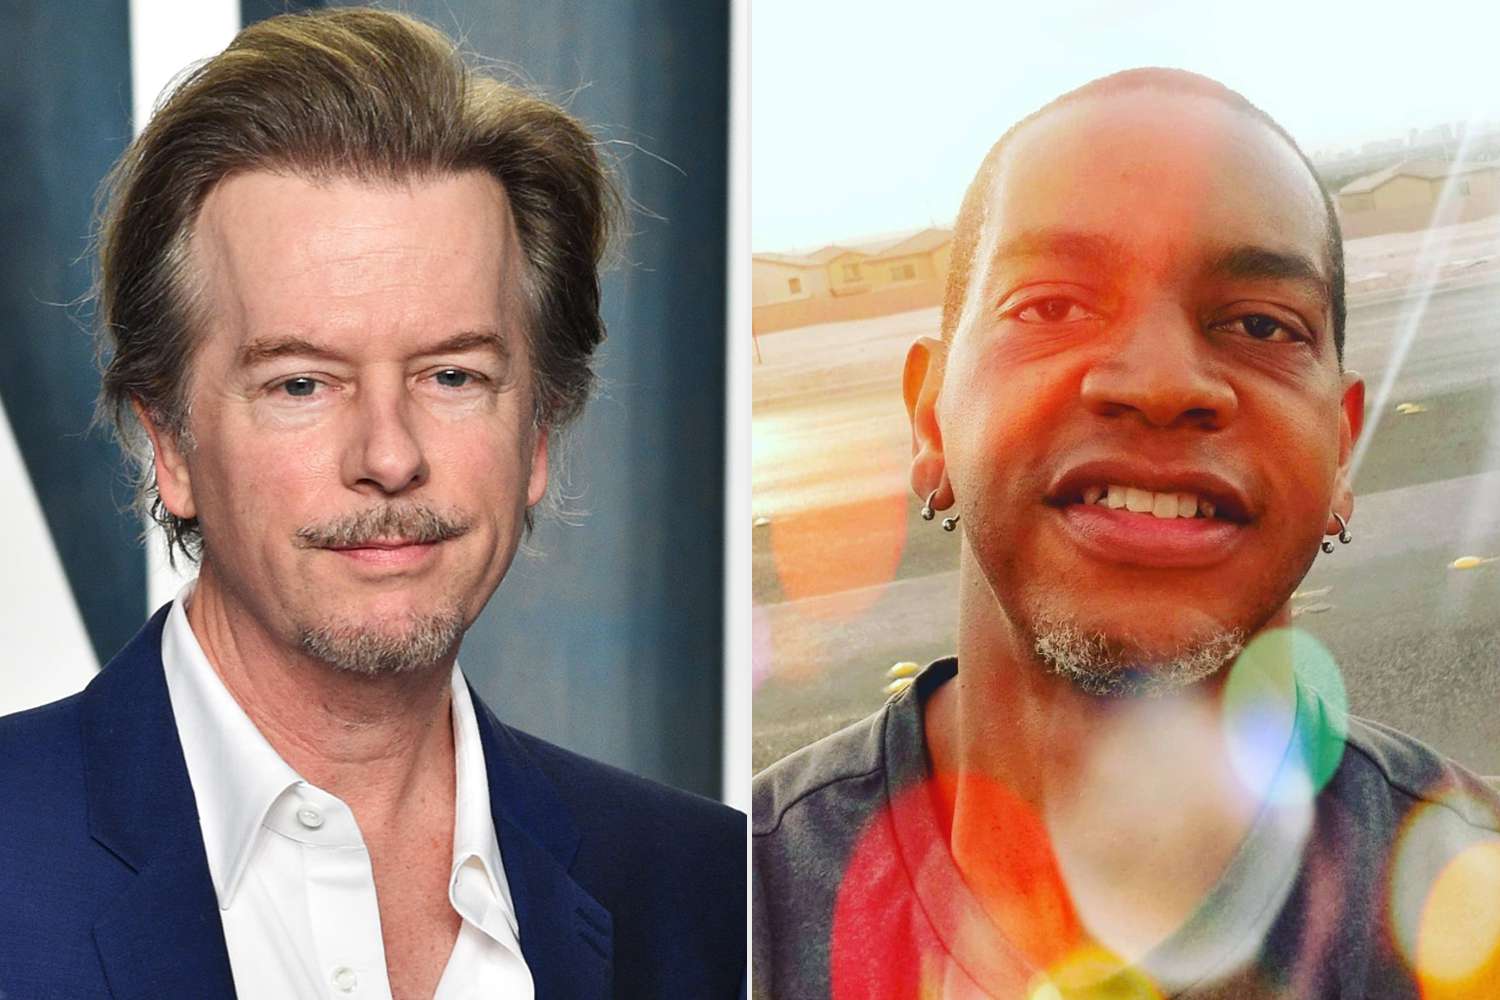 David Spade Supports Viral Burger King Worker After Underwhelming Anniversary Gift: 'Keep Up the Good Work'